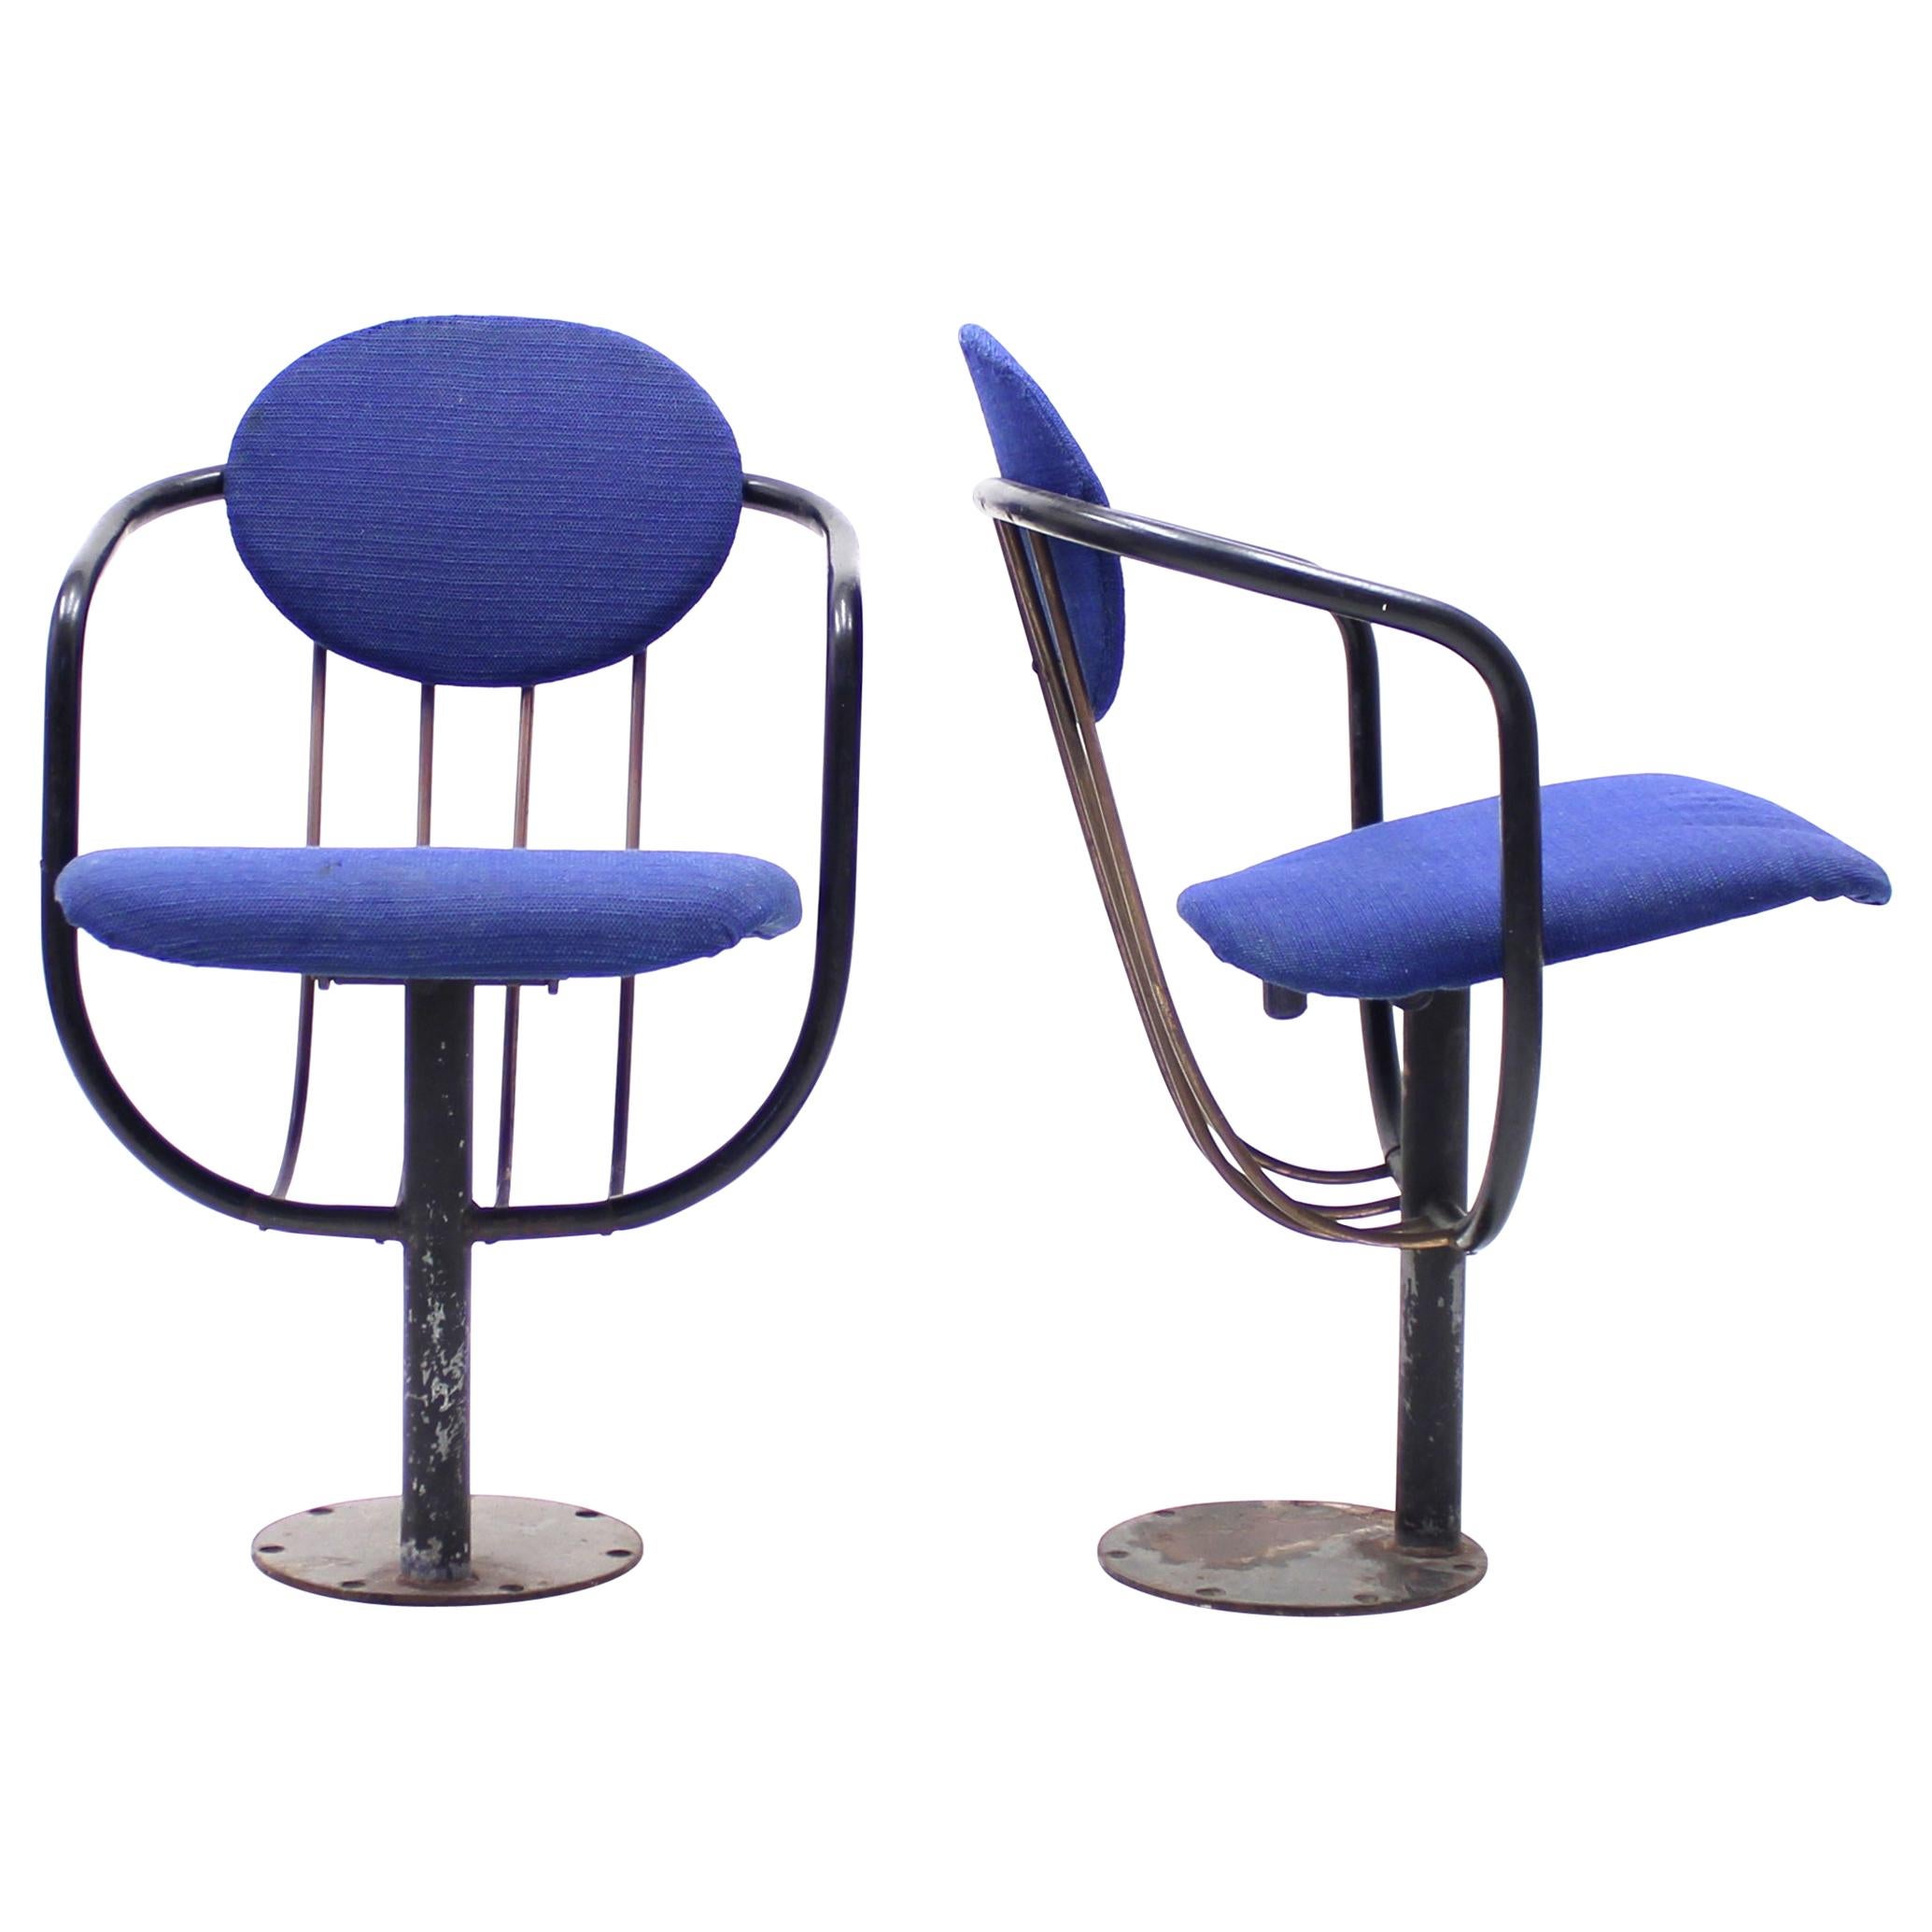 Poul Henningsen, Pair of Foldable Theatre Chairs for the Betty Nansen Theatre, 1